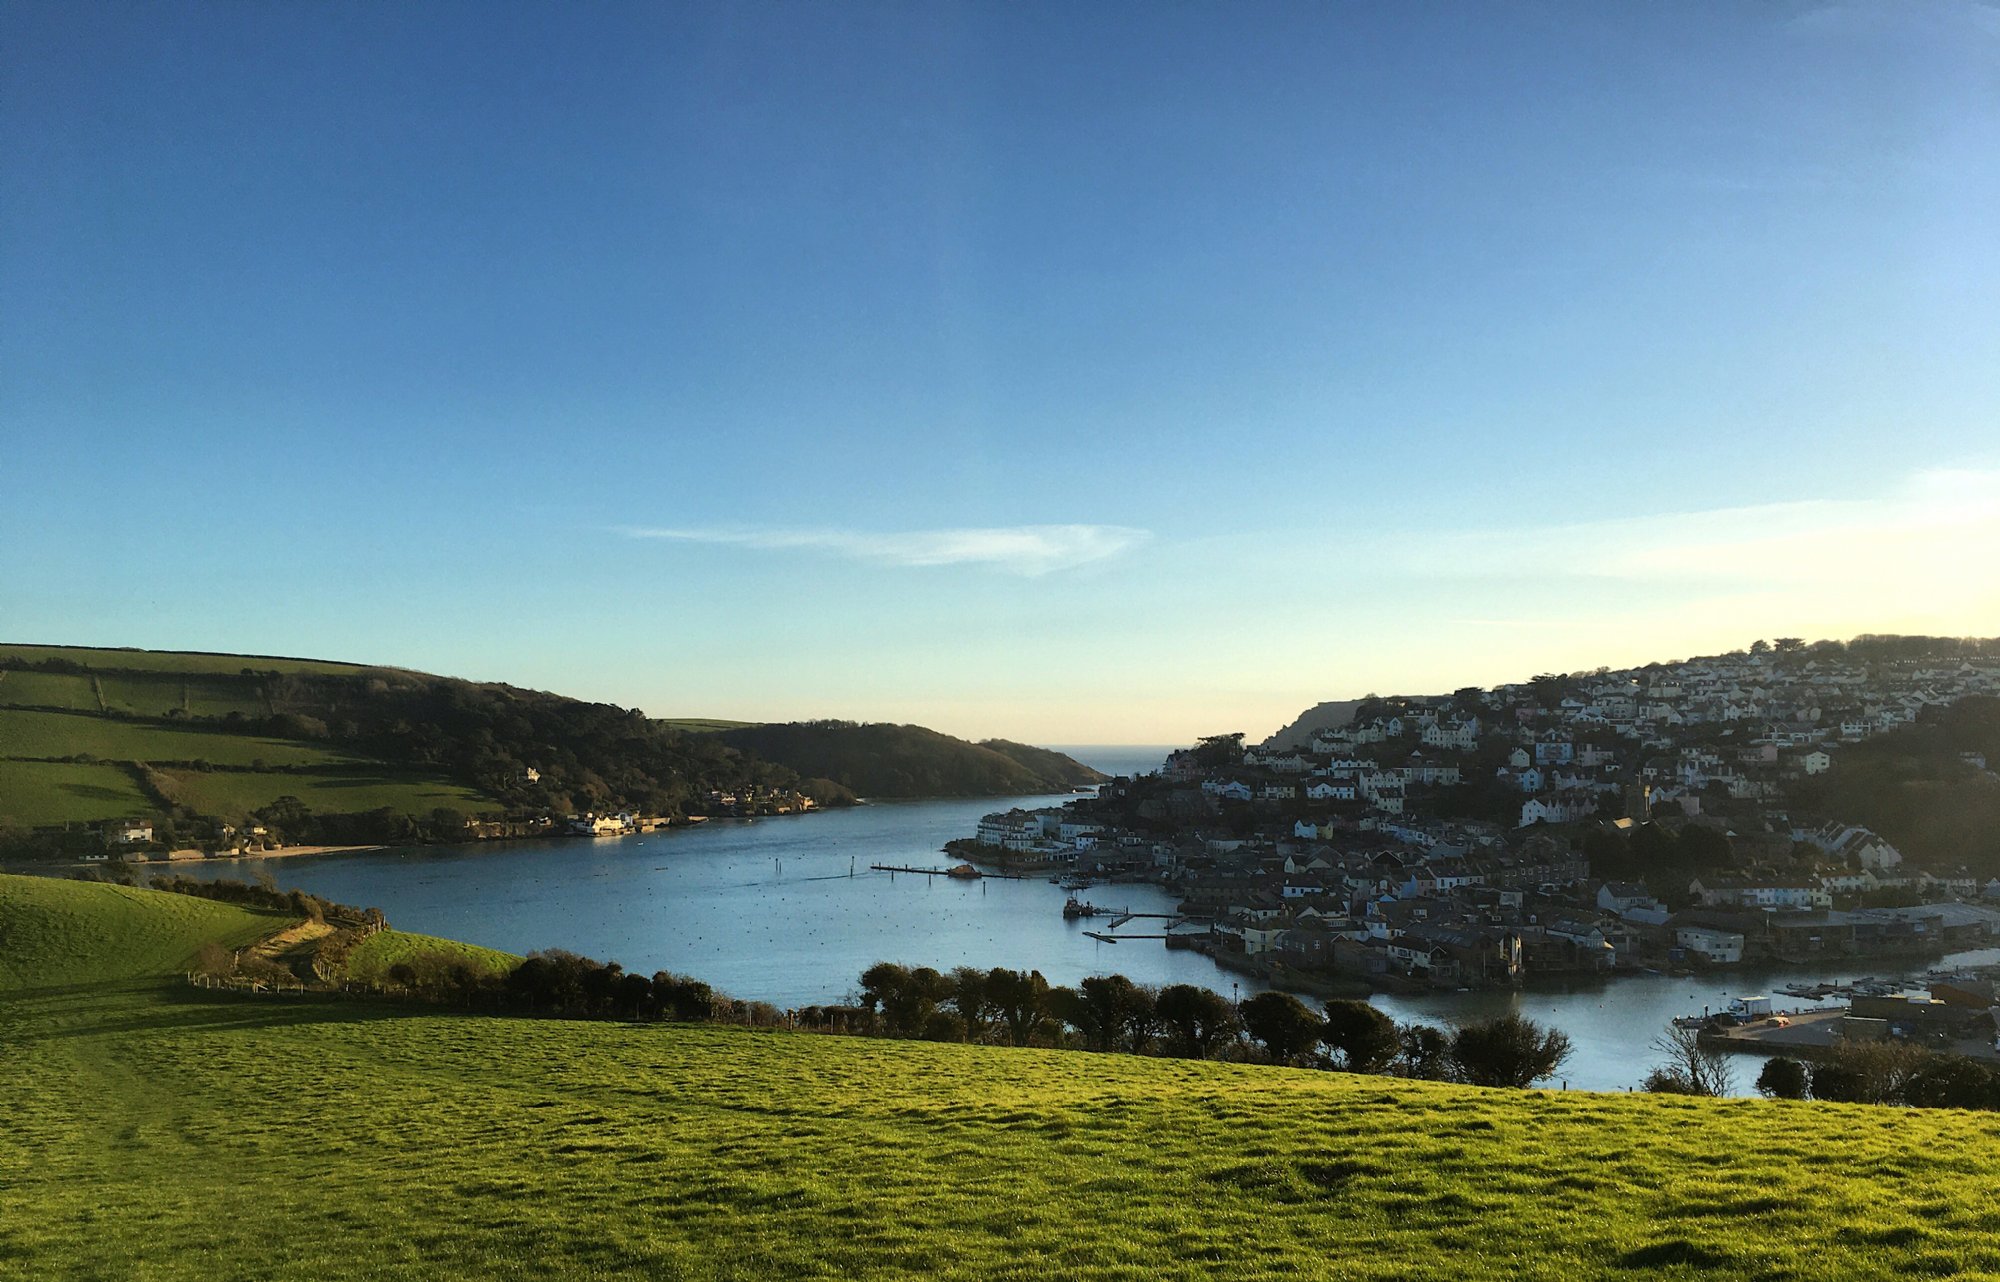 Winter in Salcombe - view from Snape's Point